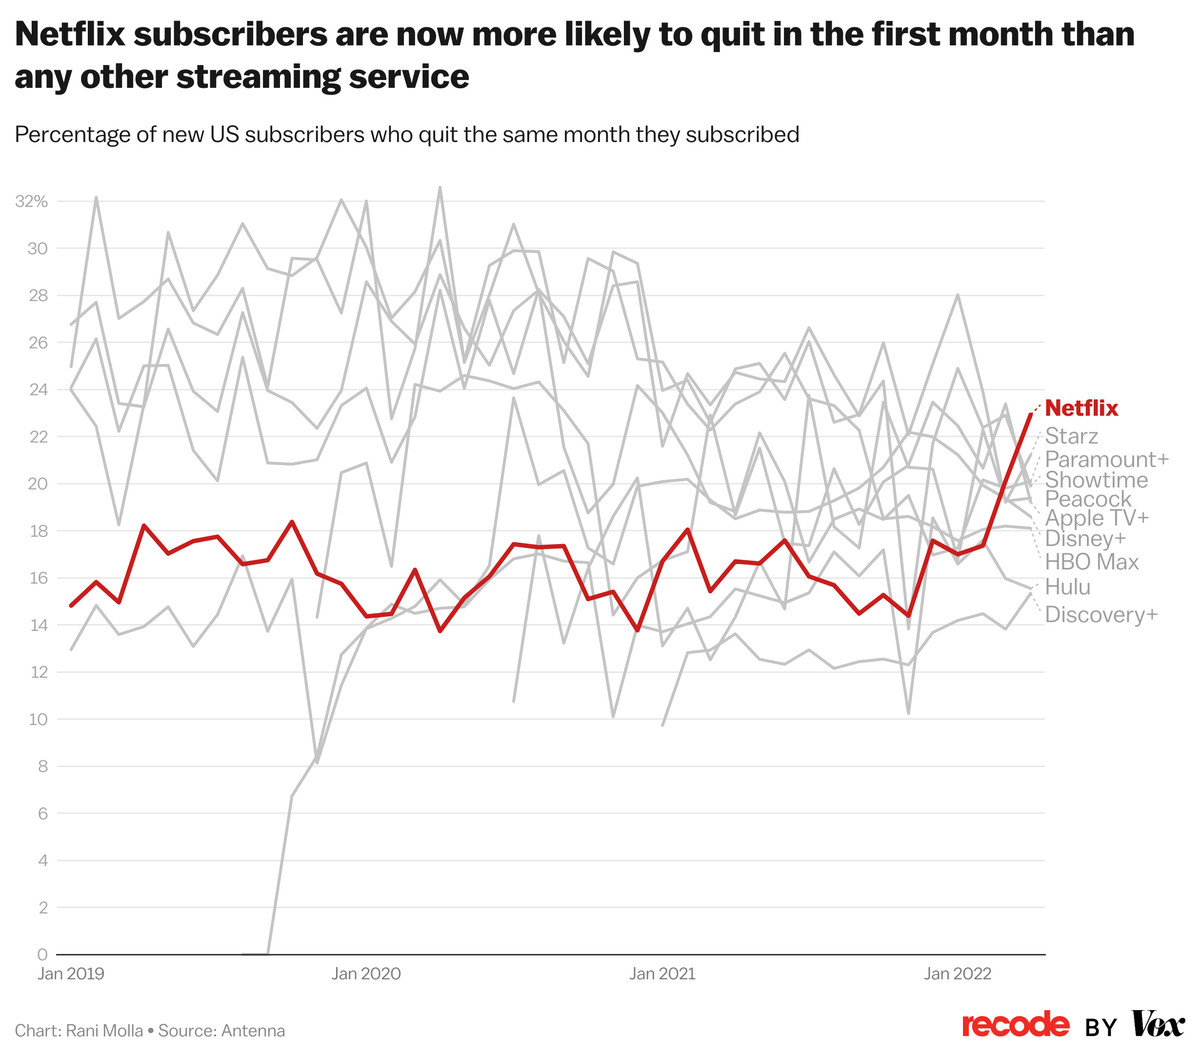 Netflix subscribers are now more likely to quit in the first month than any other streaming service 